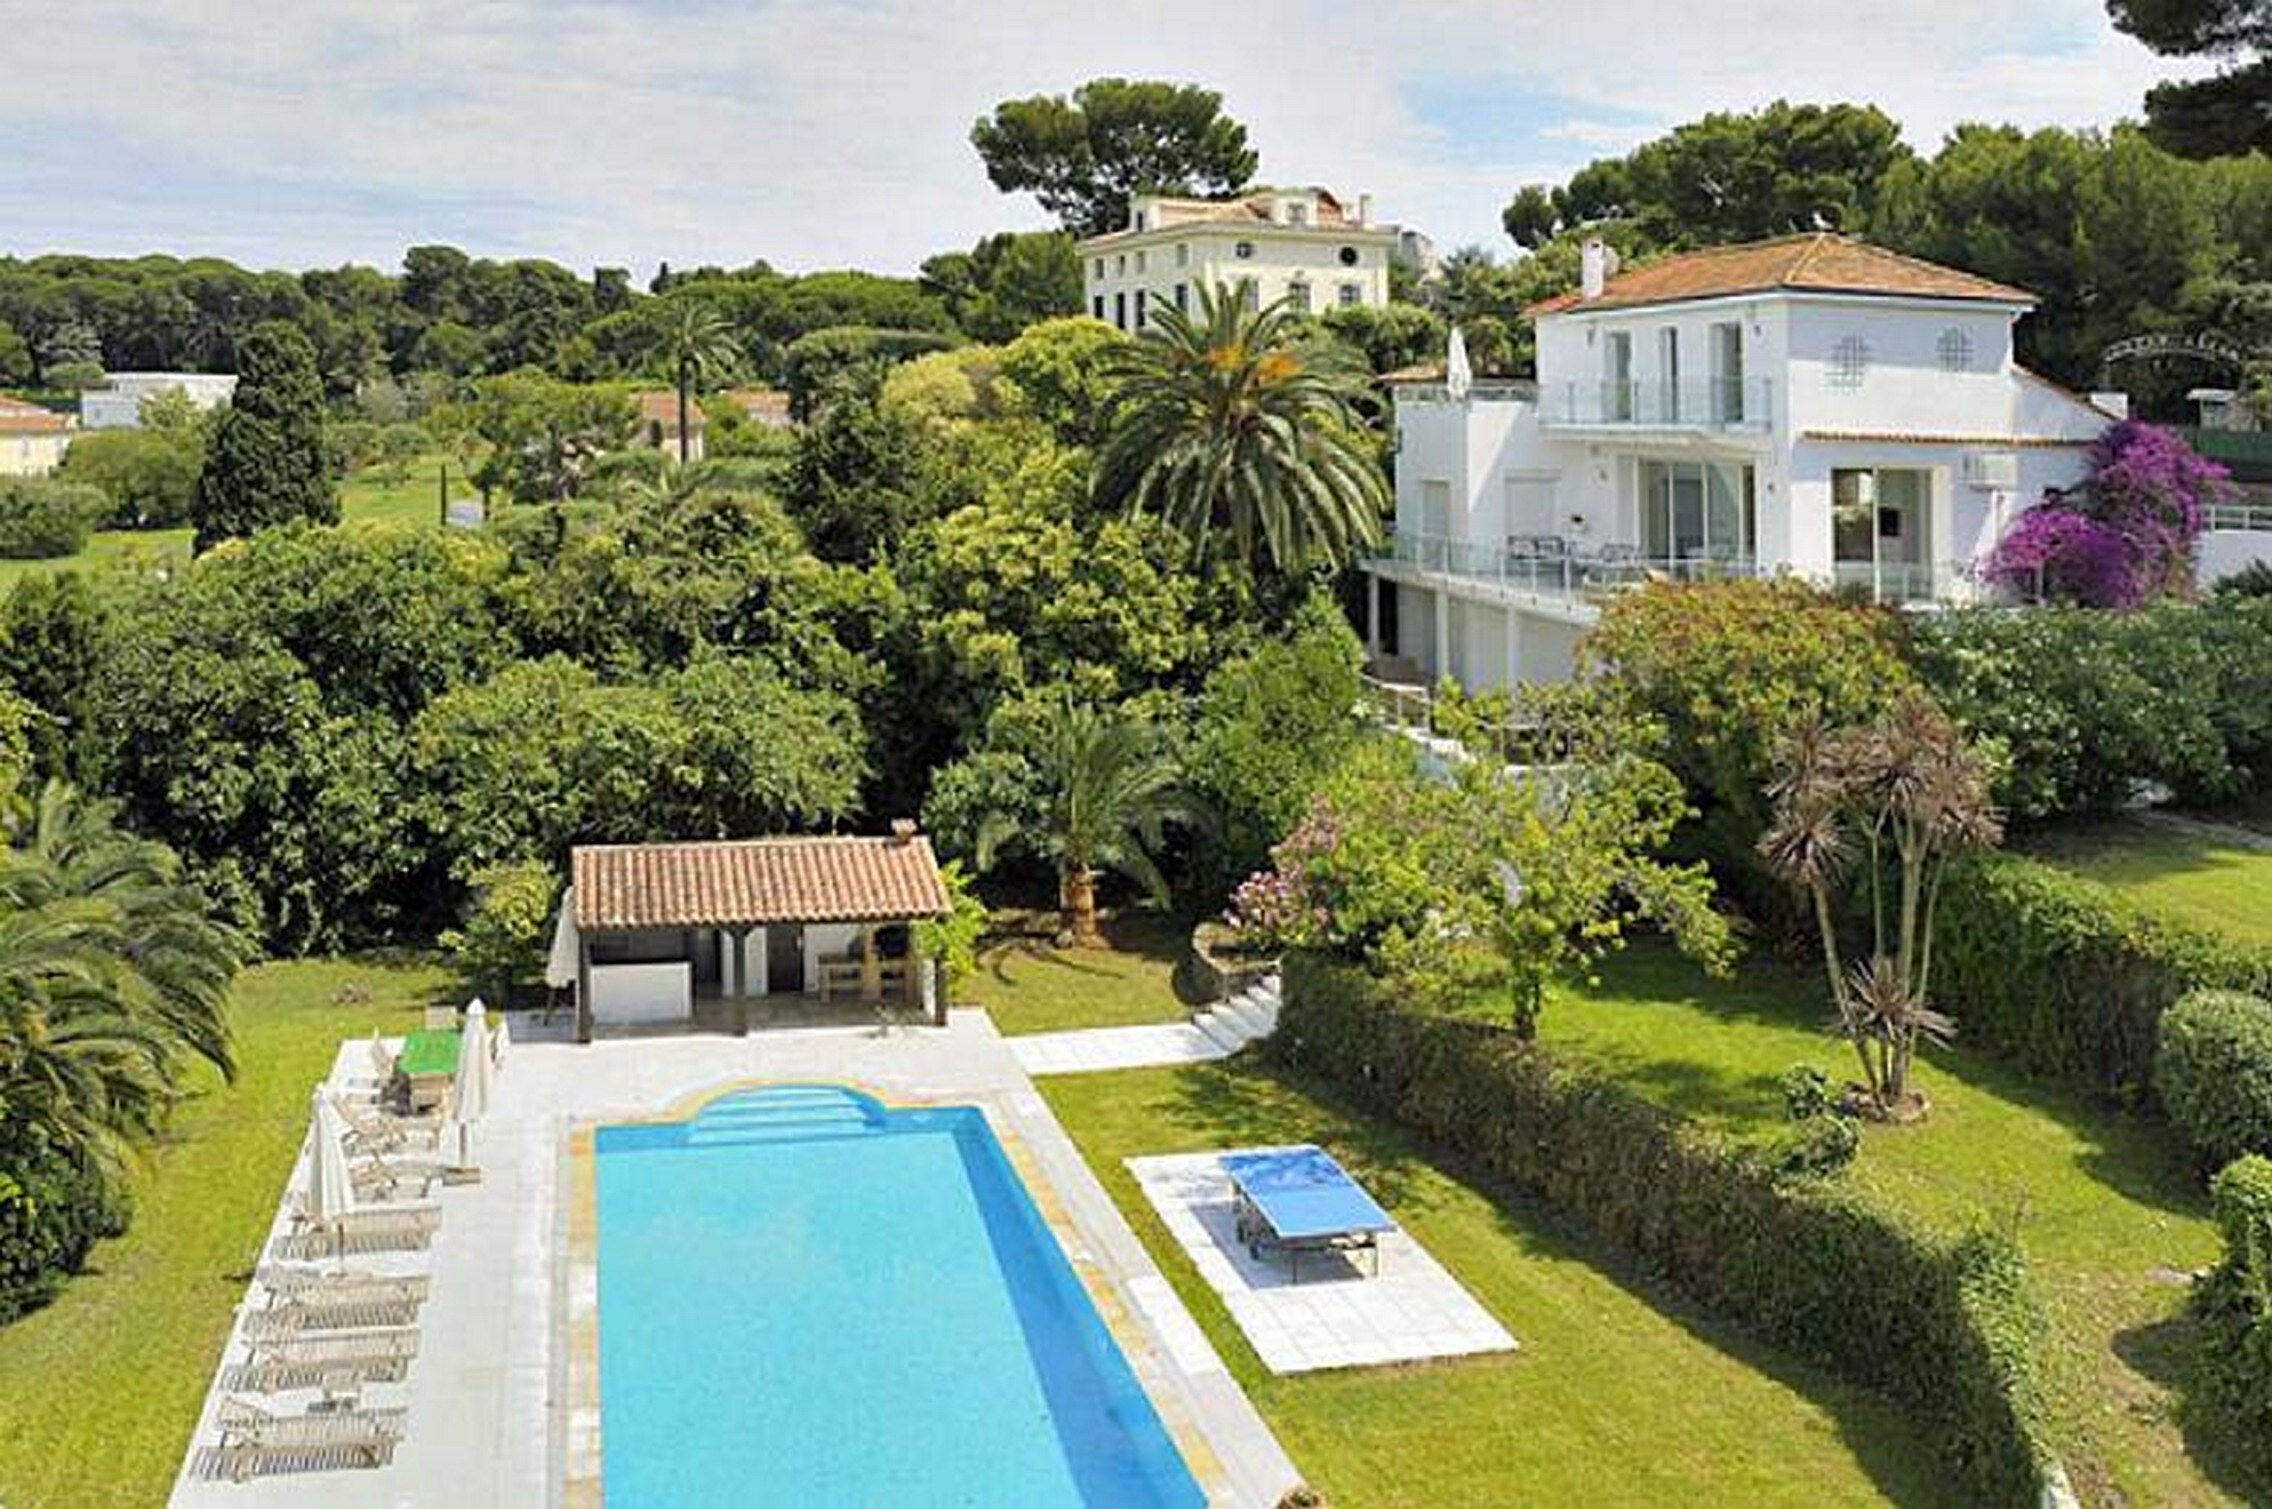 Property Image 1 - Stunning 5 bedroom period villa in superb location on the Cap d’Antibes